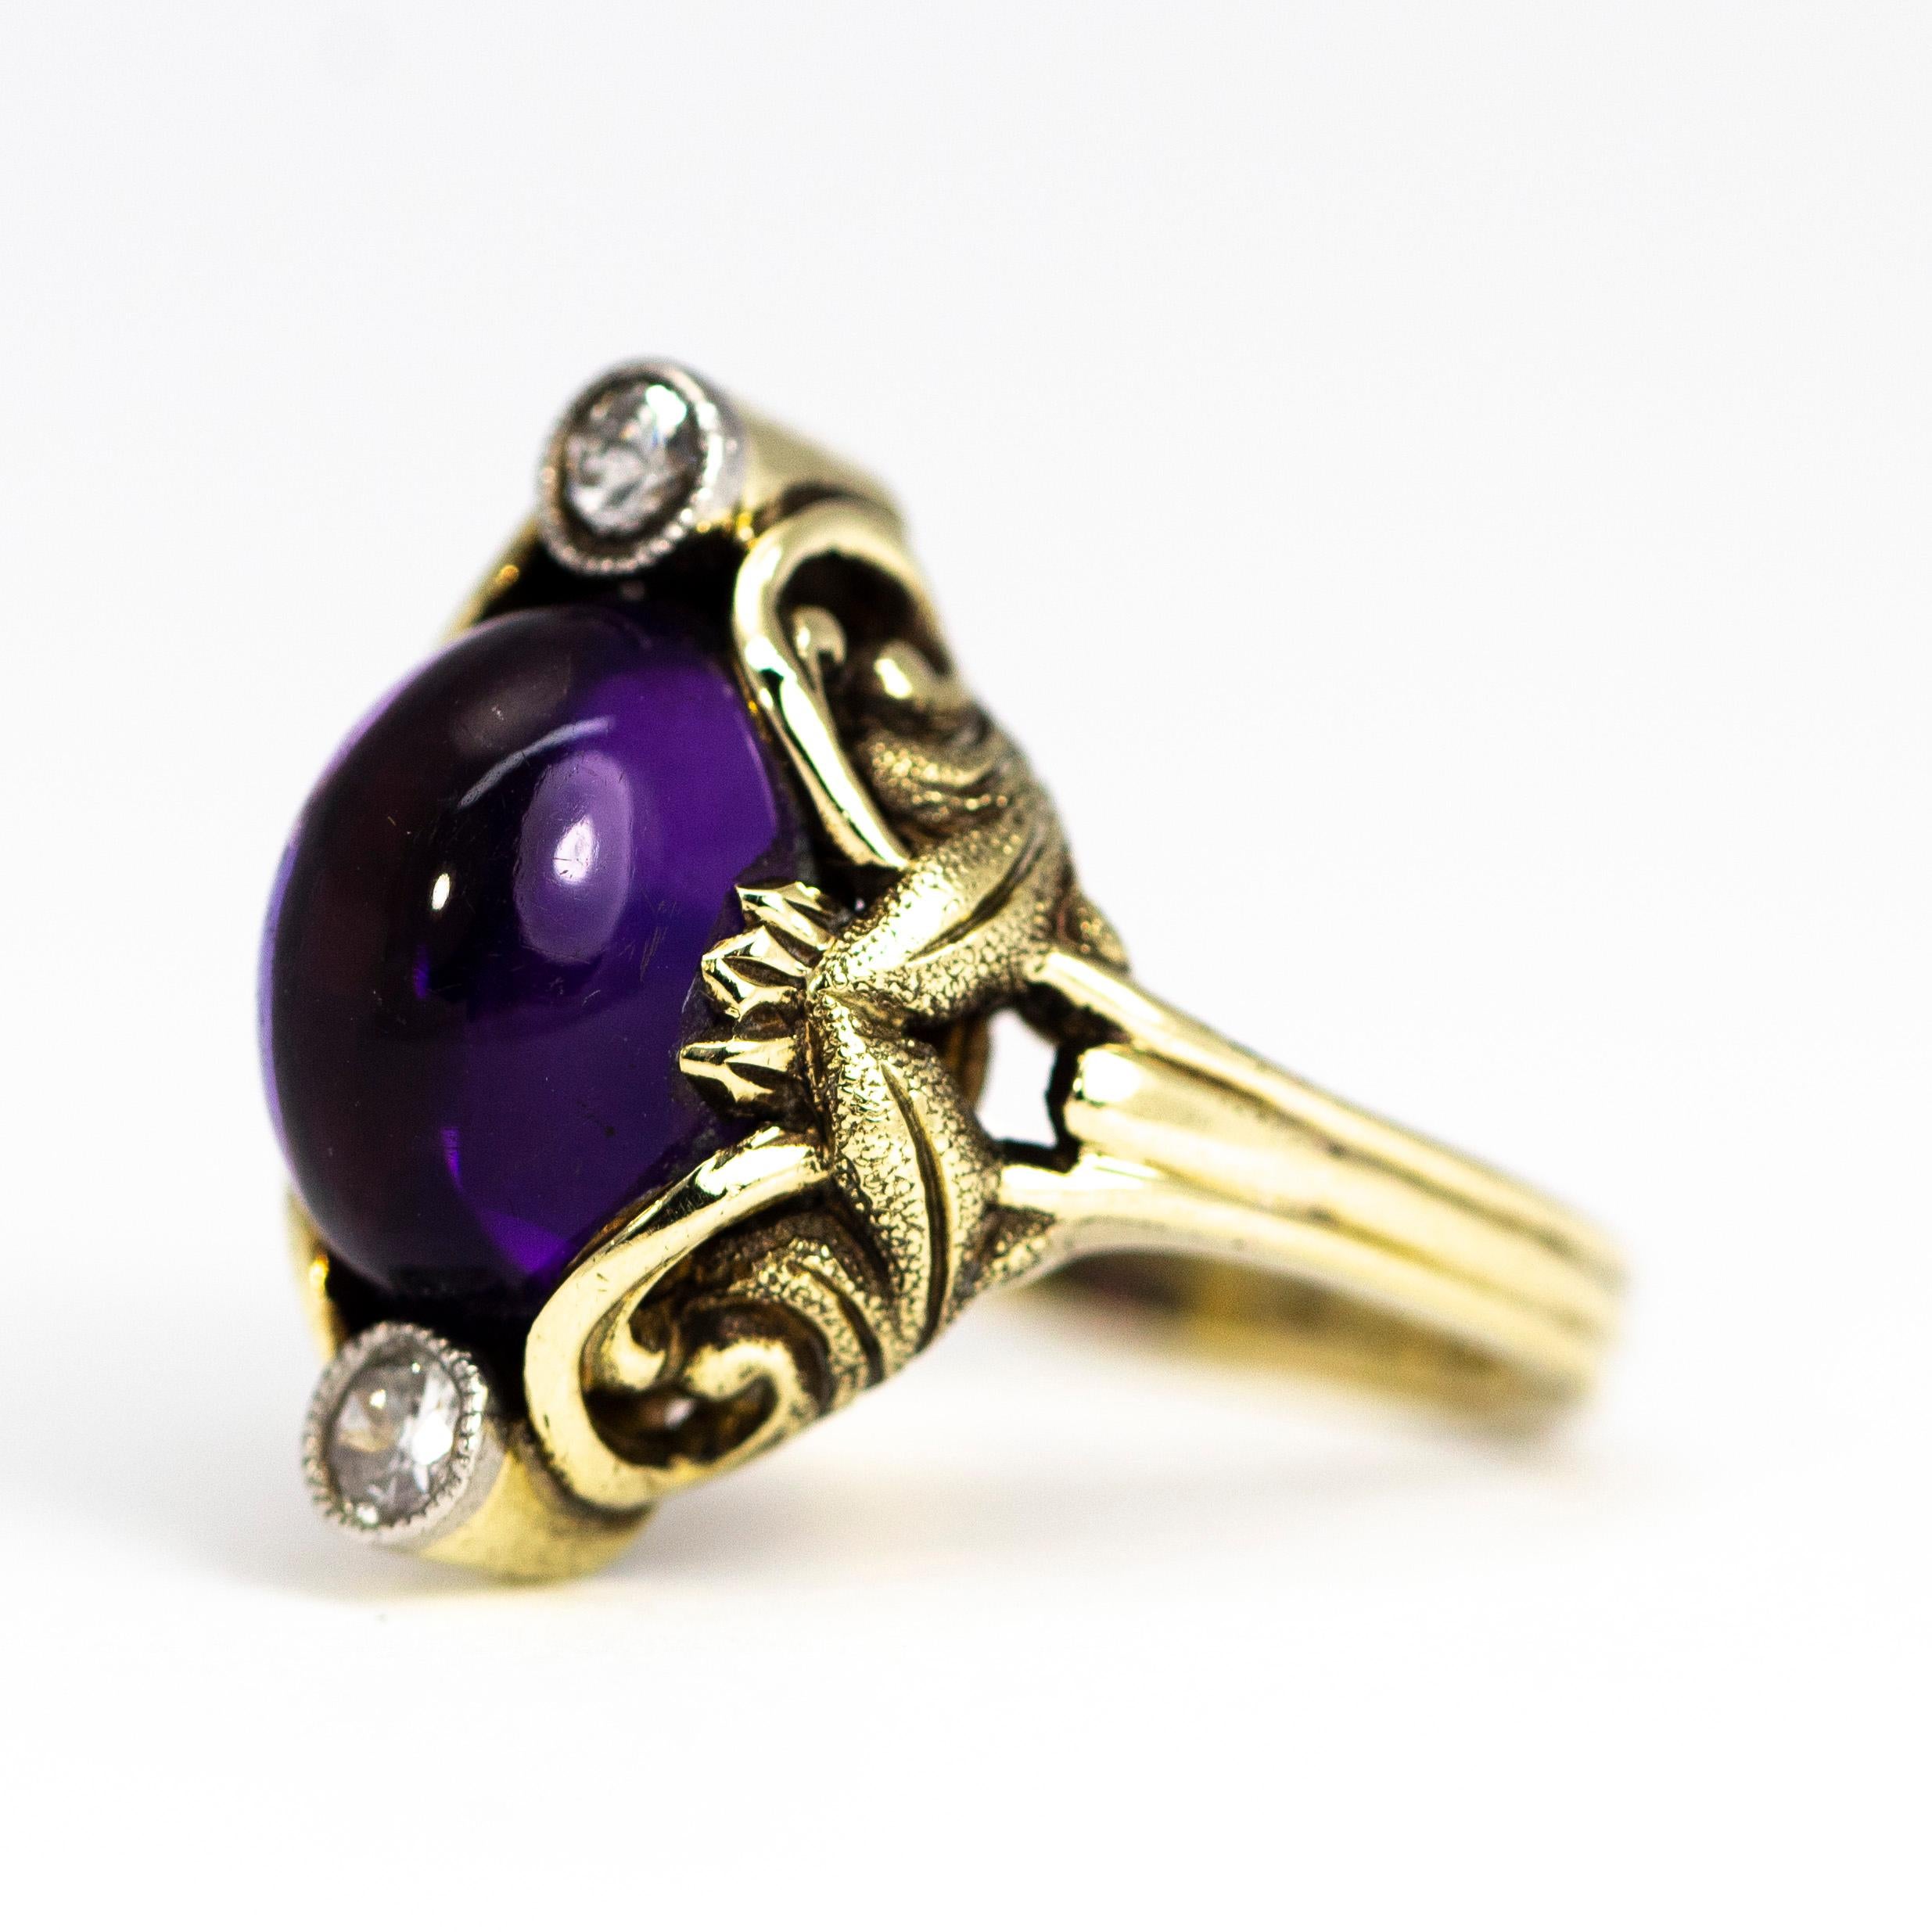 This stunning amethyst cabochon is set in a stunning 15ct gold ornate setting. Above and below the glossy stone sit two 7pt diamonds. The shoulders have scroll and leaf details. The leaves on the shoulders are finely textured and give wonderful